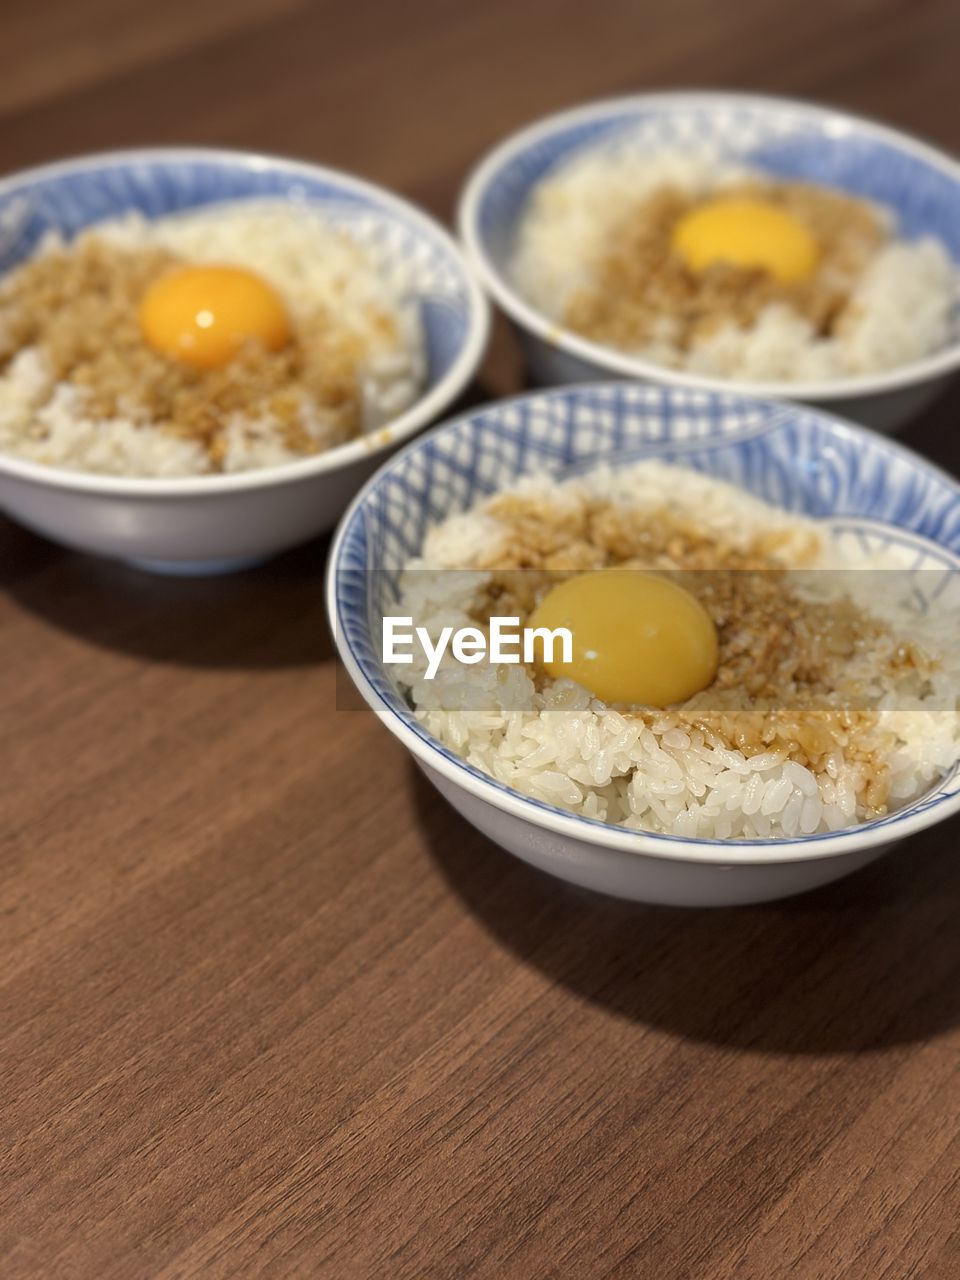 food and drink, food, dish, egg, bowl, healthy eating, wellbeing, breakfast, meal, indoors, freshness, no people, egg yolk, table, produce, asian food, wood, close-up, steamed rice, cuisine, high angle view, focus on foreground